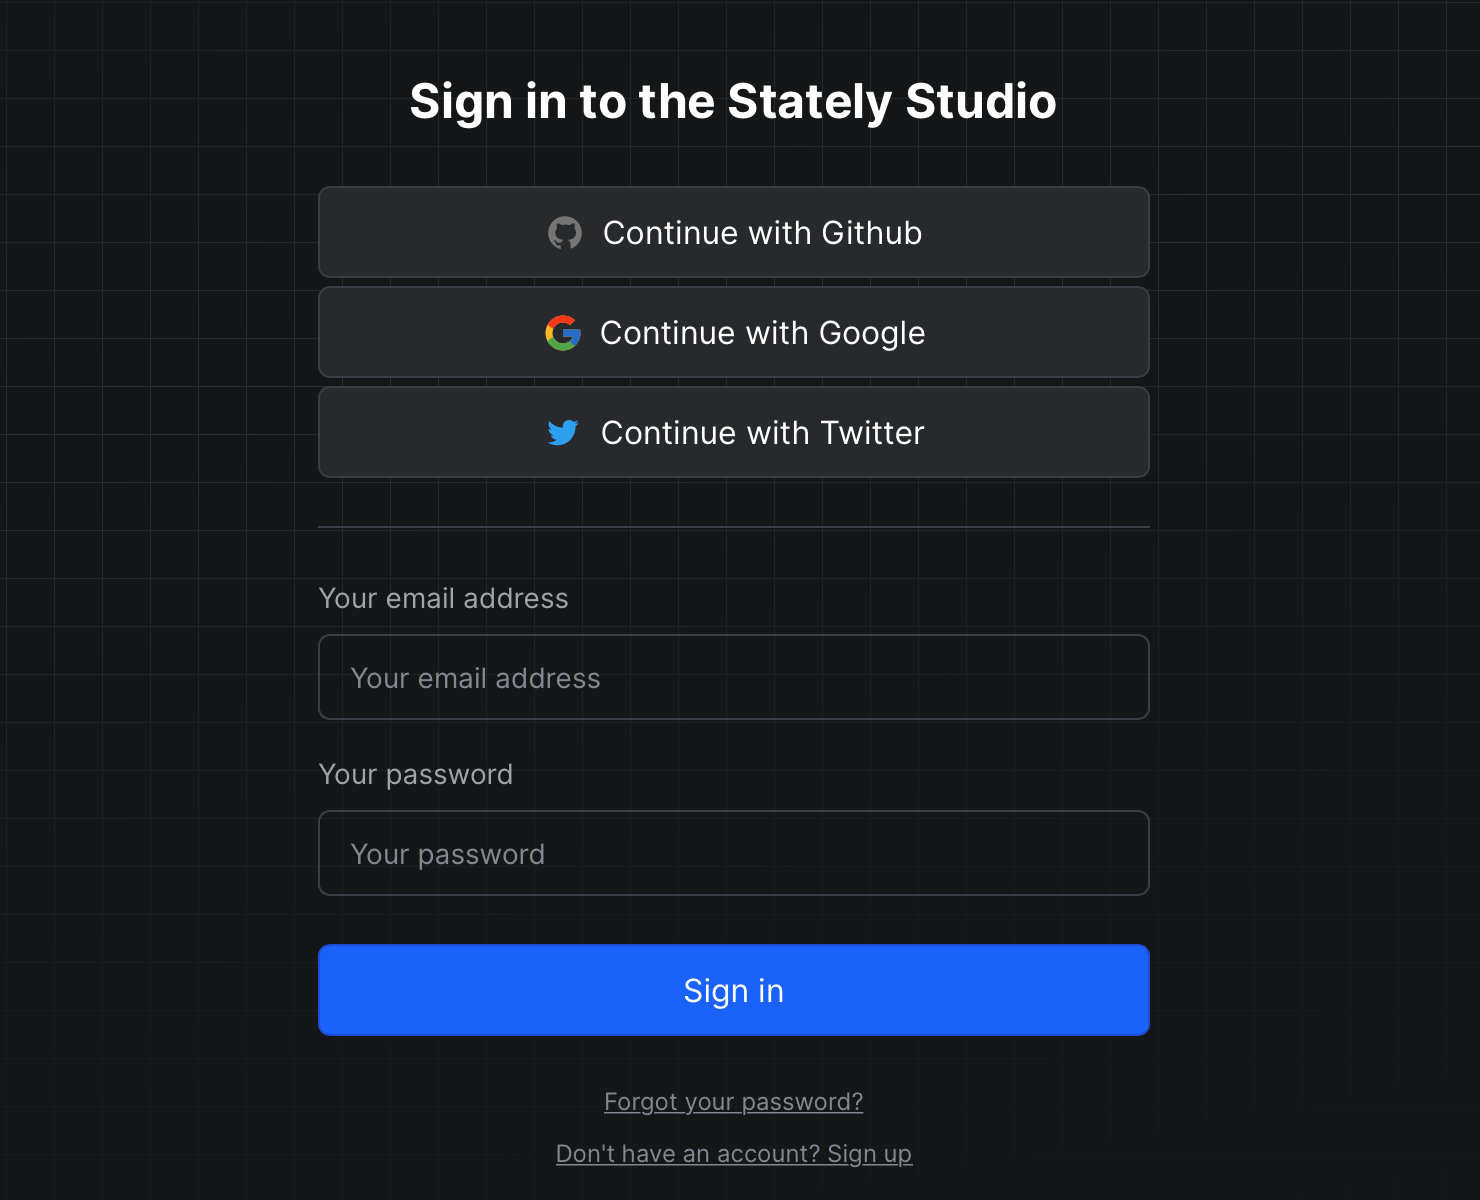 The Stately Studio sign up page with login options for GitHub, Google, Twitter, as well as email address and password fields for sign up.